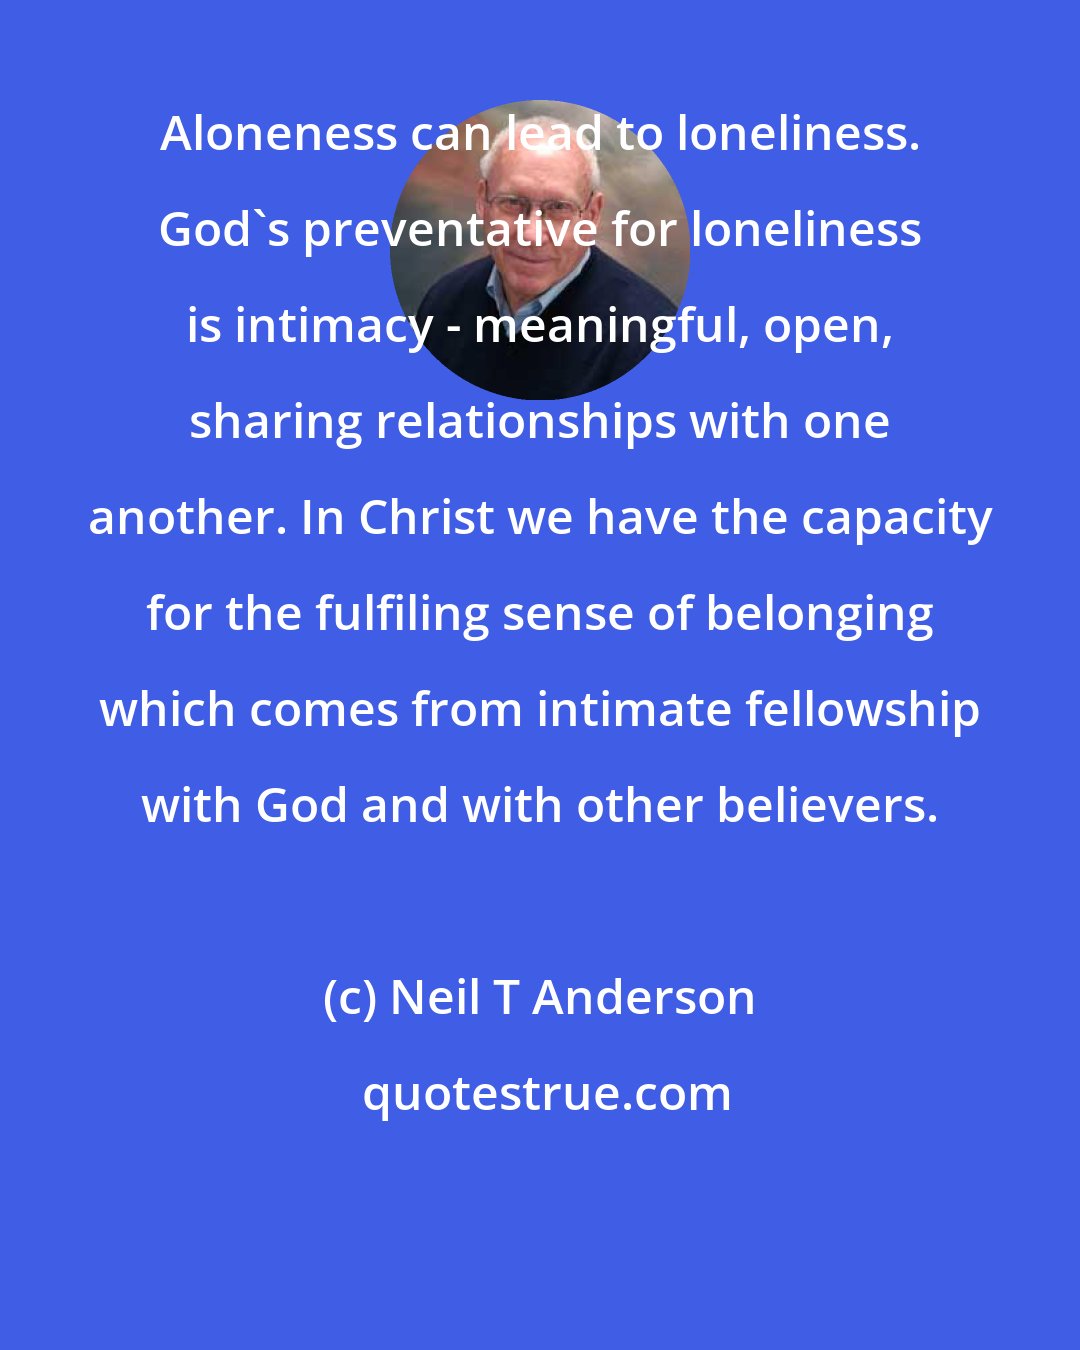 Neil T Anderson: Aloneness can lead to loneliness. God's preventative for loneliness is intimacy - meaningful, open, sharing relationships with one another. In Christ we have the capacity for the fulfiling sense of belonging which comes from intimate fellowship with God and with other believers.